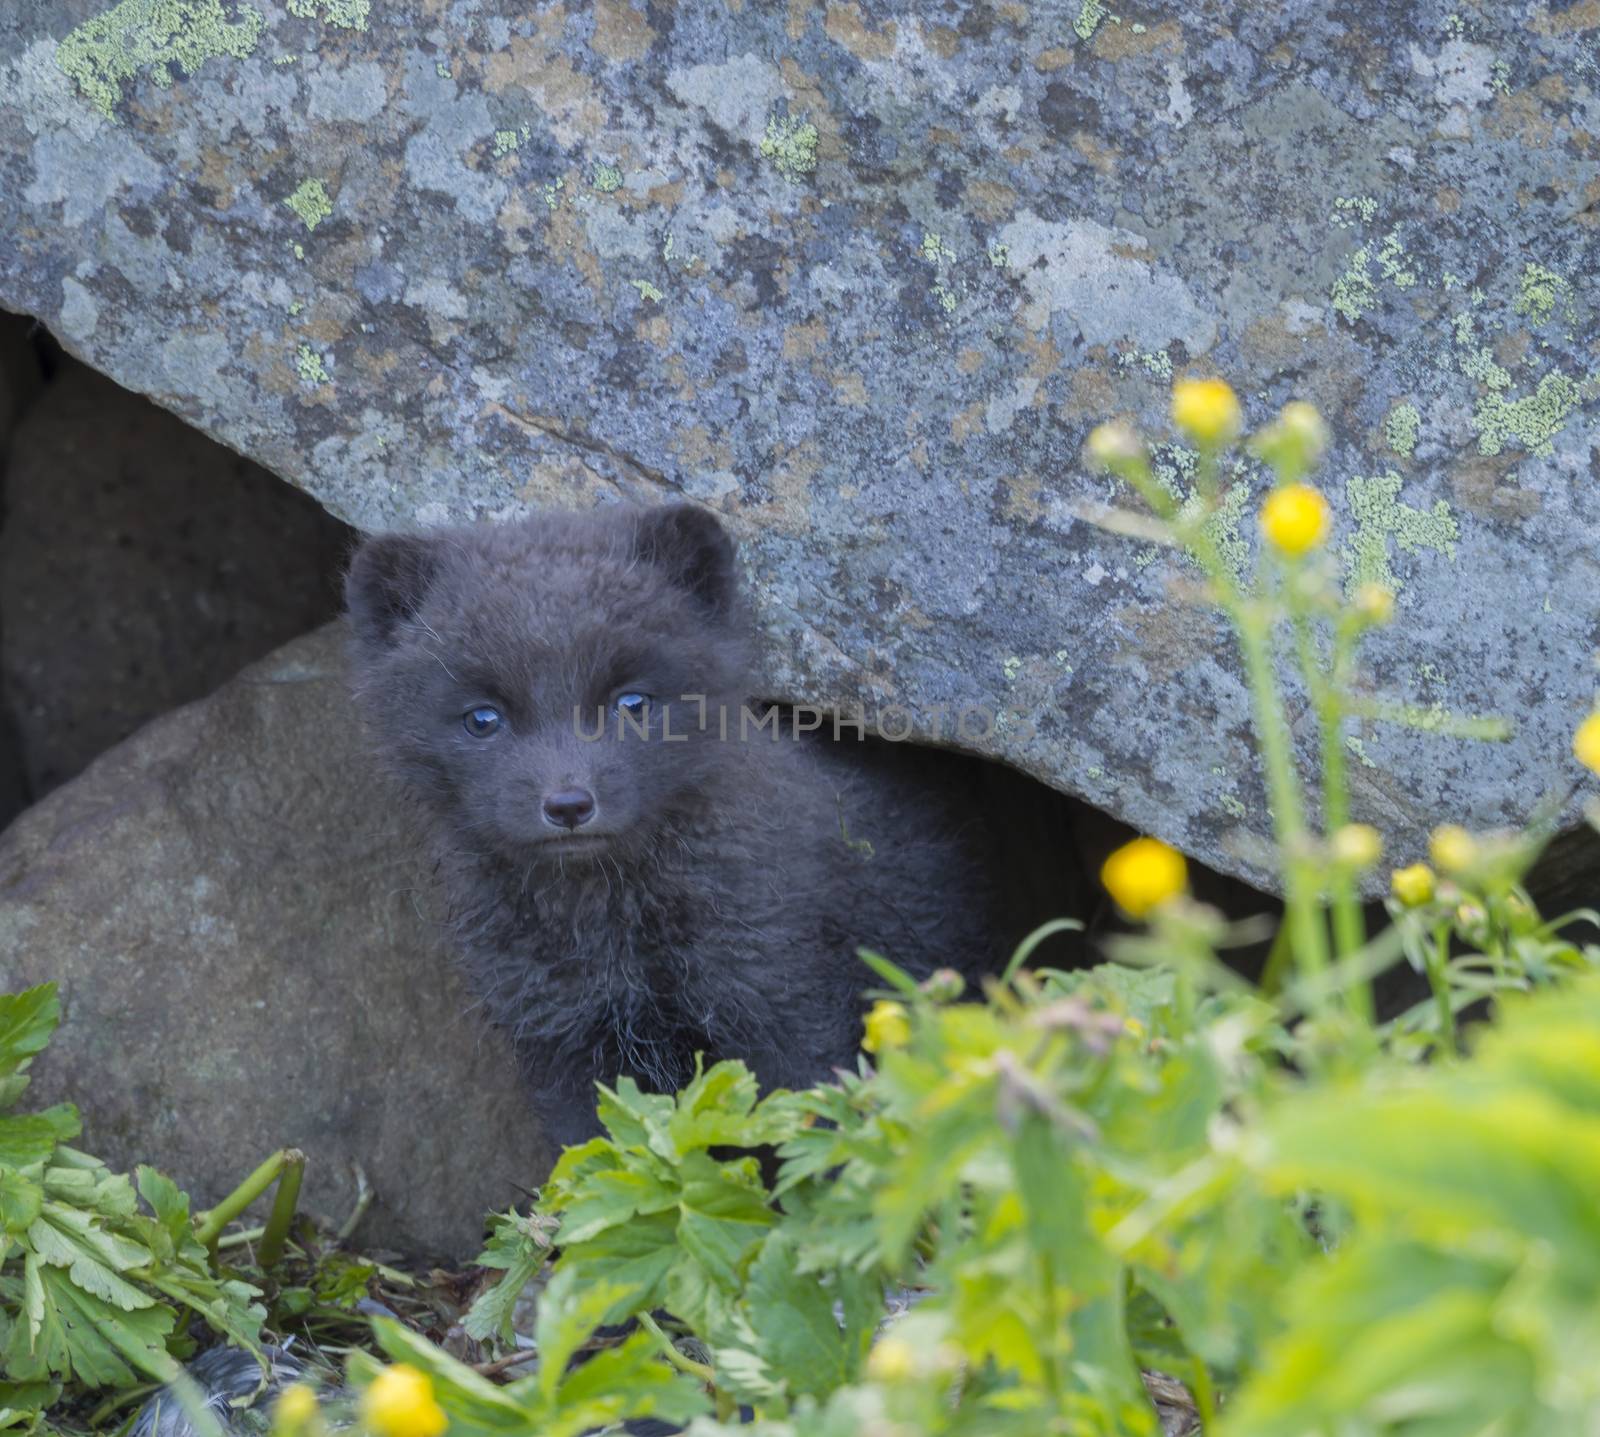 young playful arctic fox cub fox Alopex lagopus beringensis curious looking from their lair under stone, green grass plants foreground, summer in nature reserve in Hornstrandir, westfjords, Iceland by Henkeova